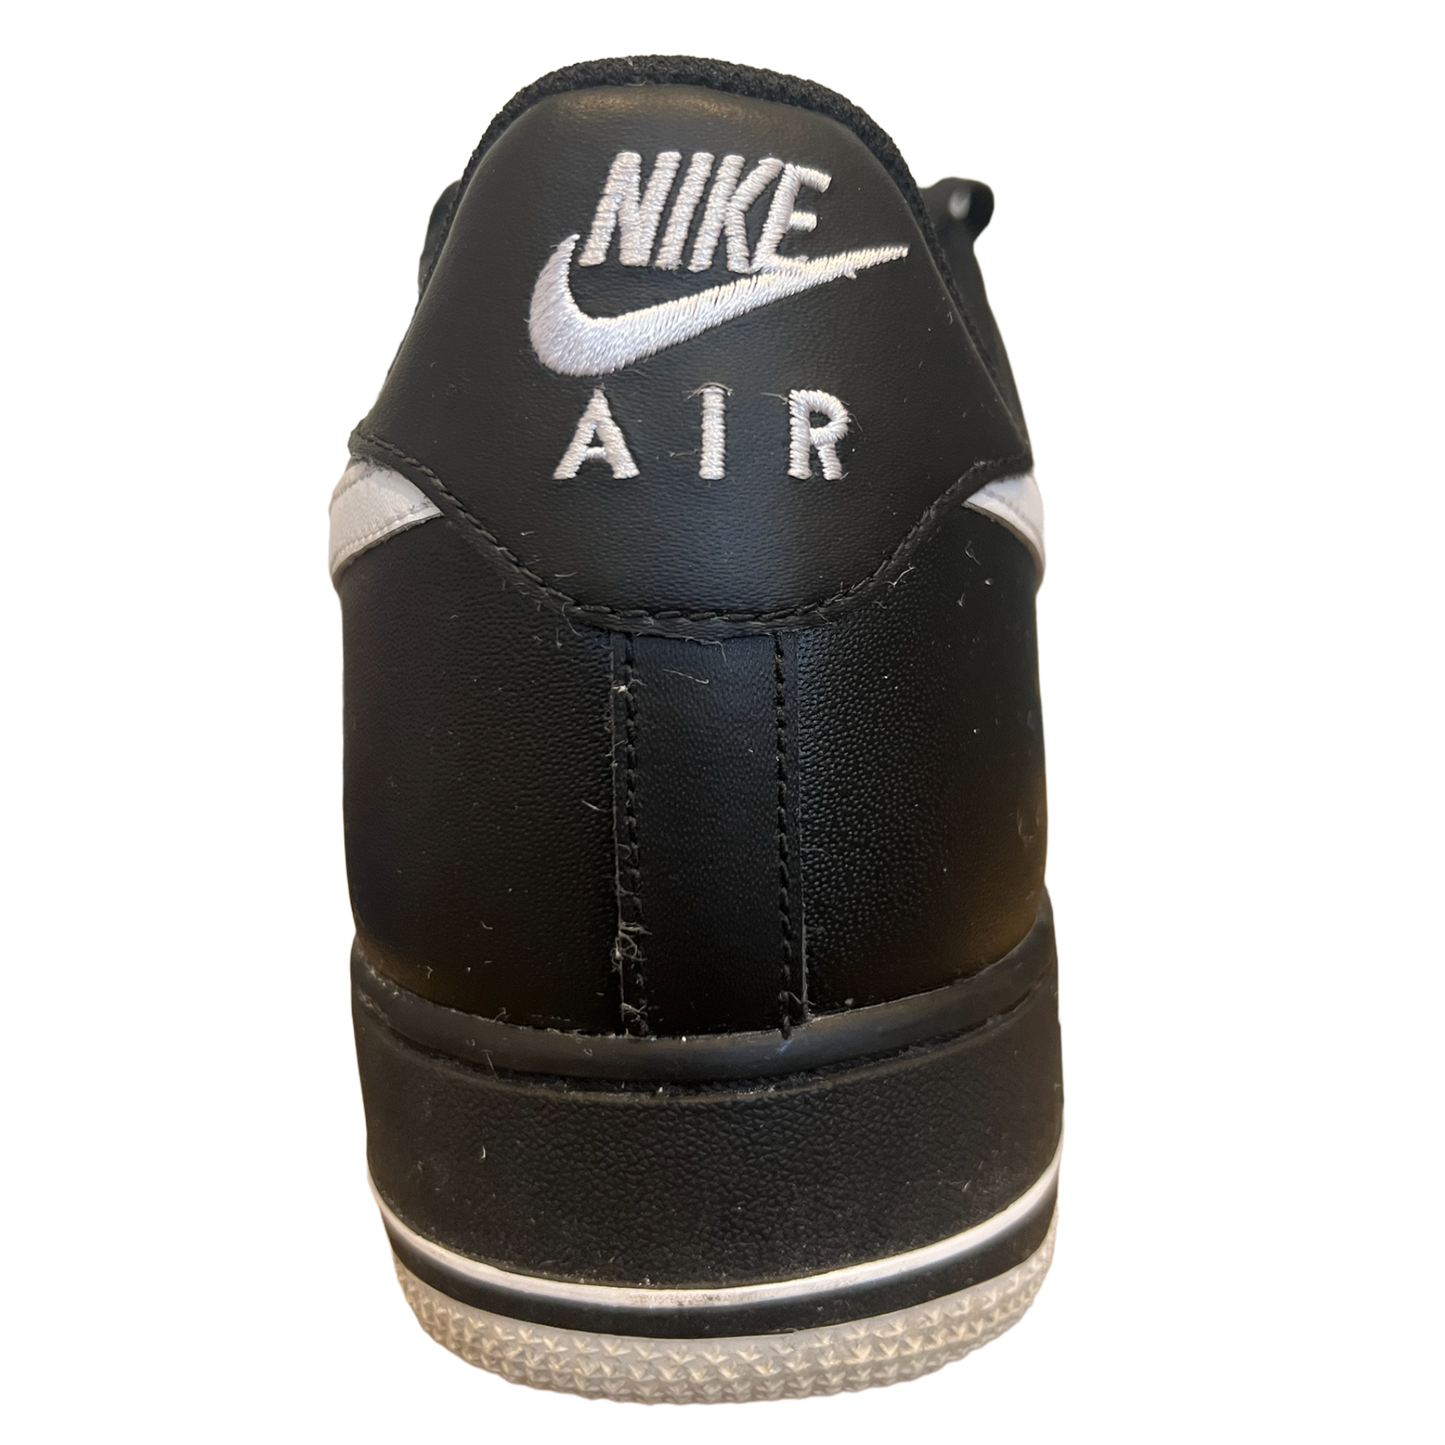 Nike - "Air Force 1 Low Black" - Size 12.5